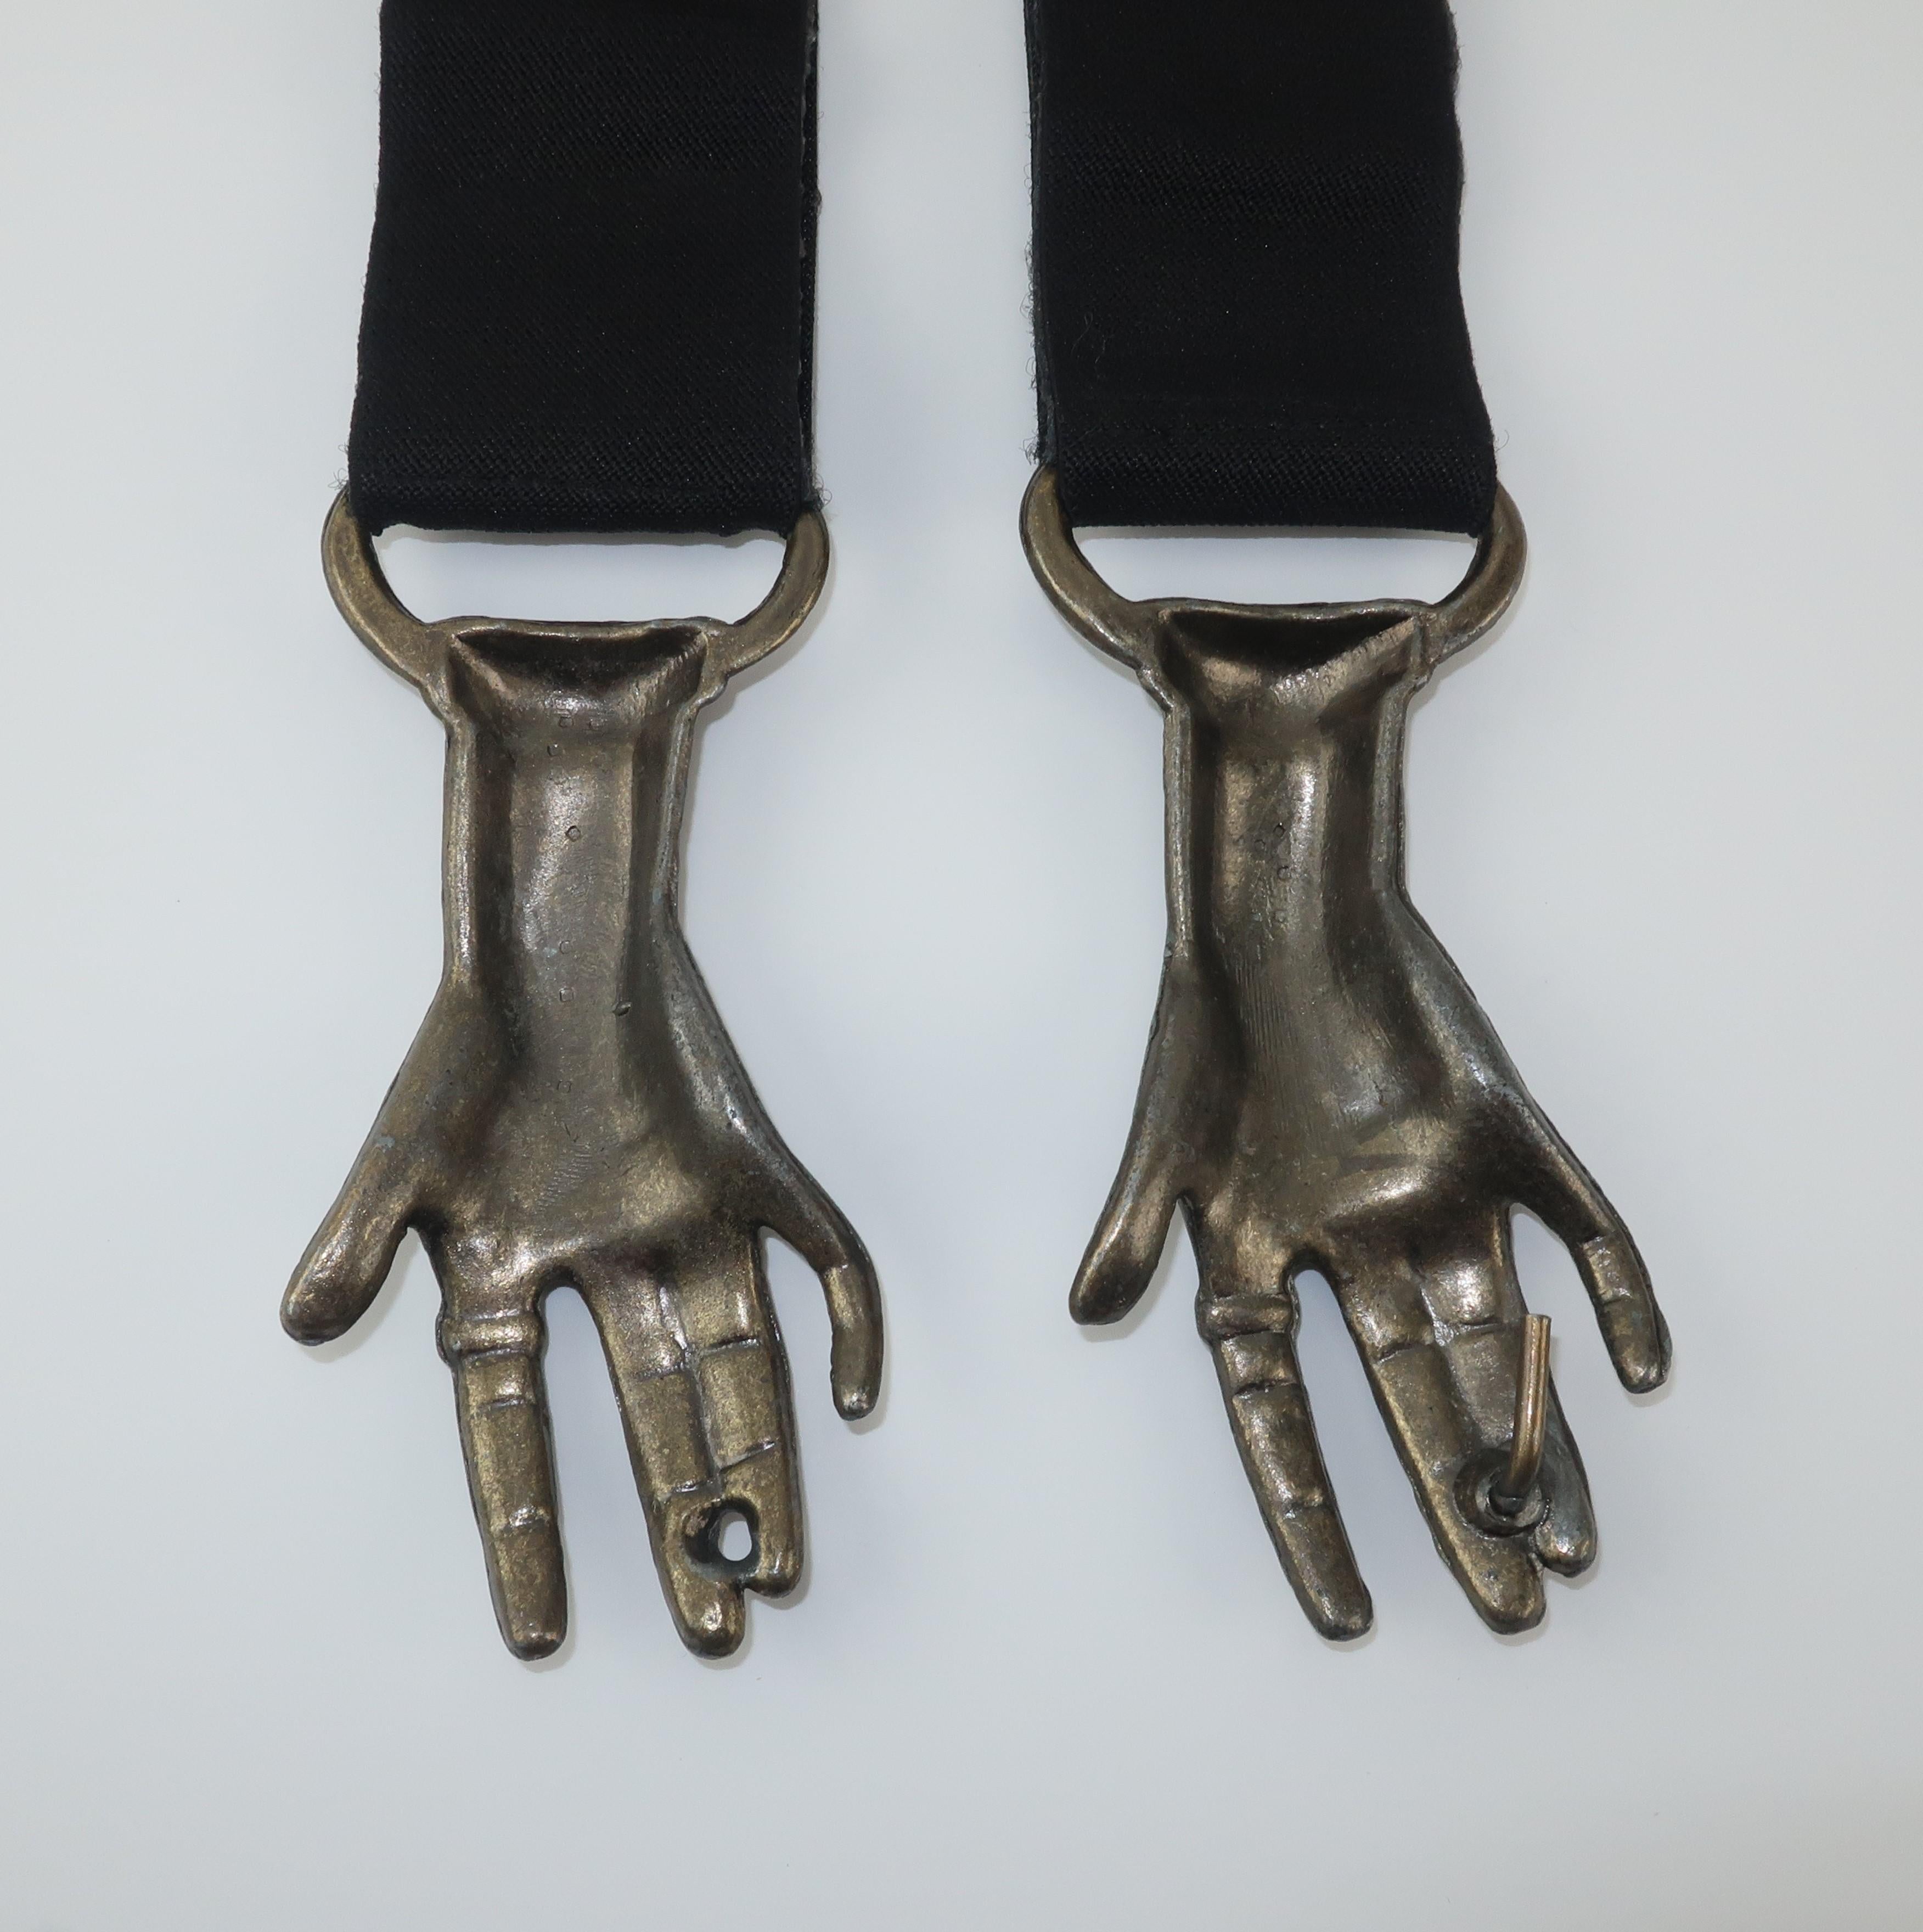 Black Surrealist Victorian Style Clasping Hands Belt Buckle, C.1970